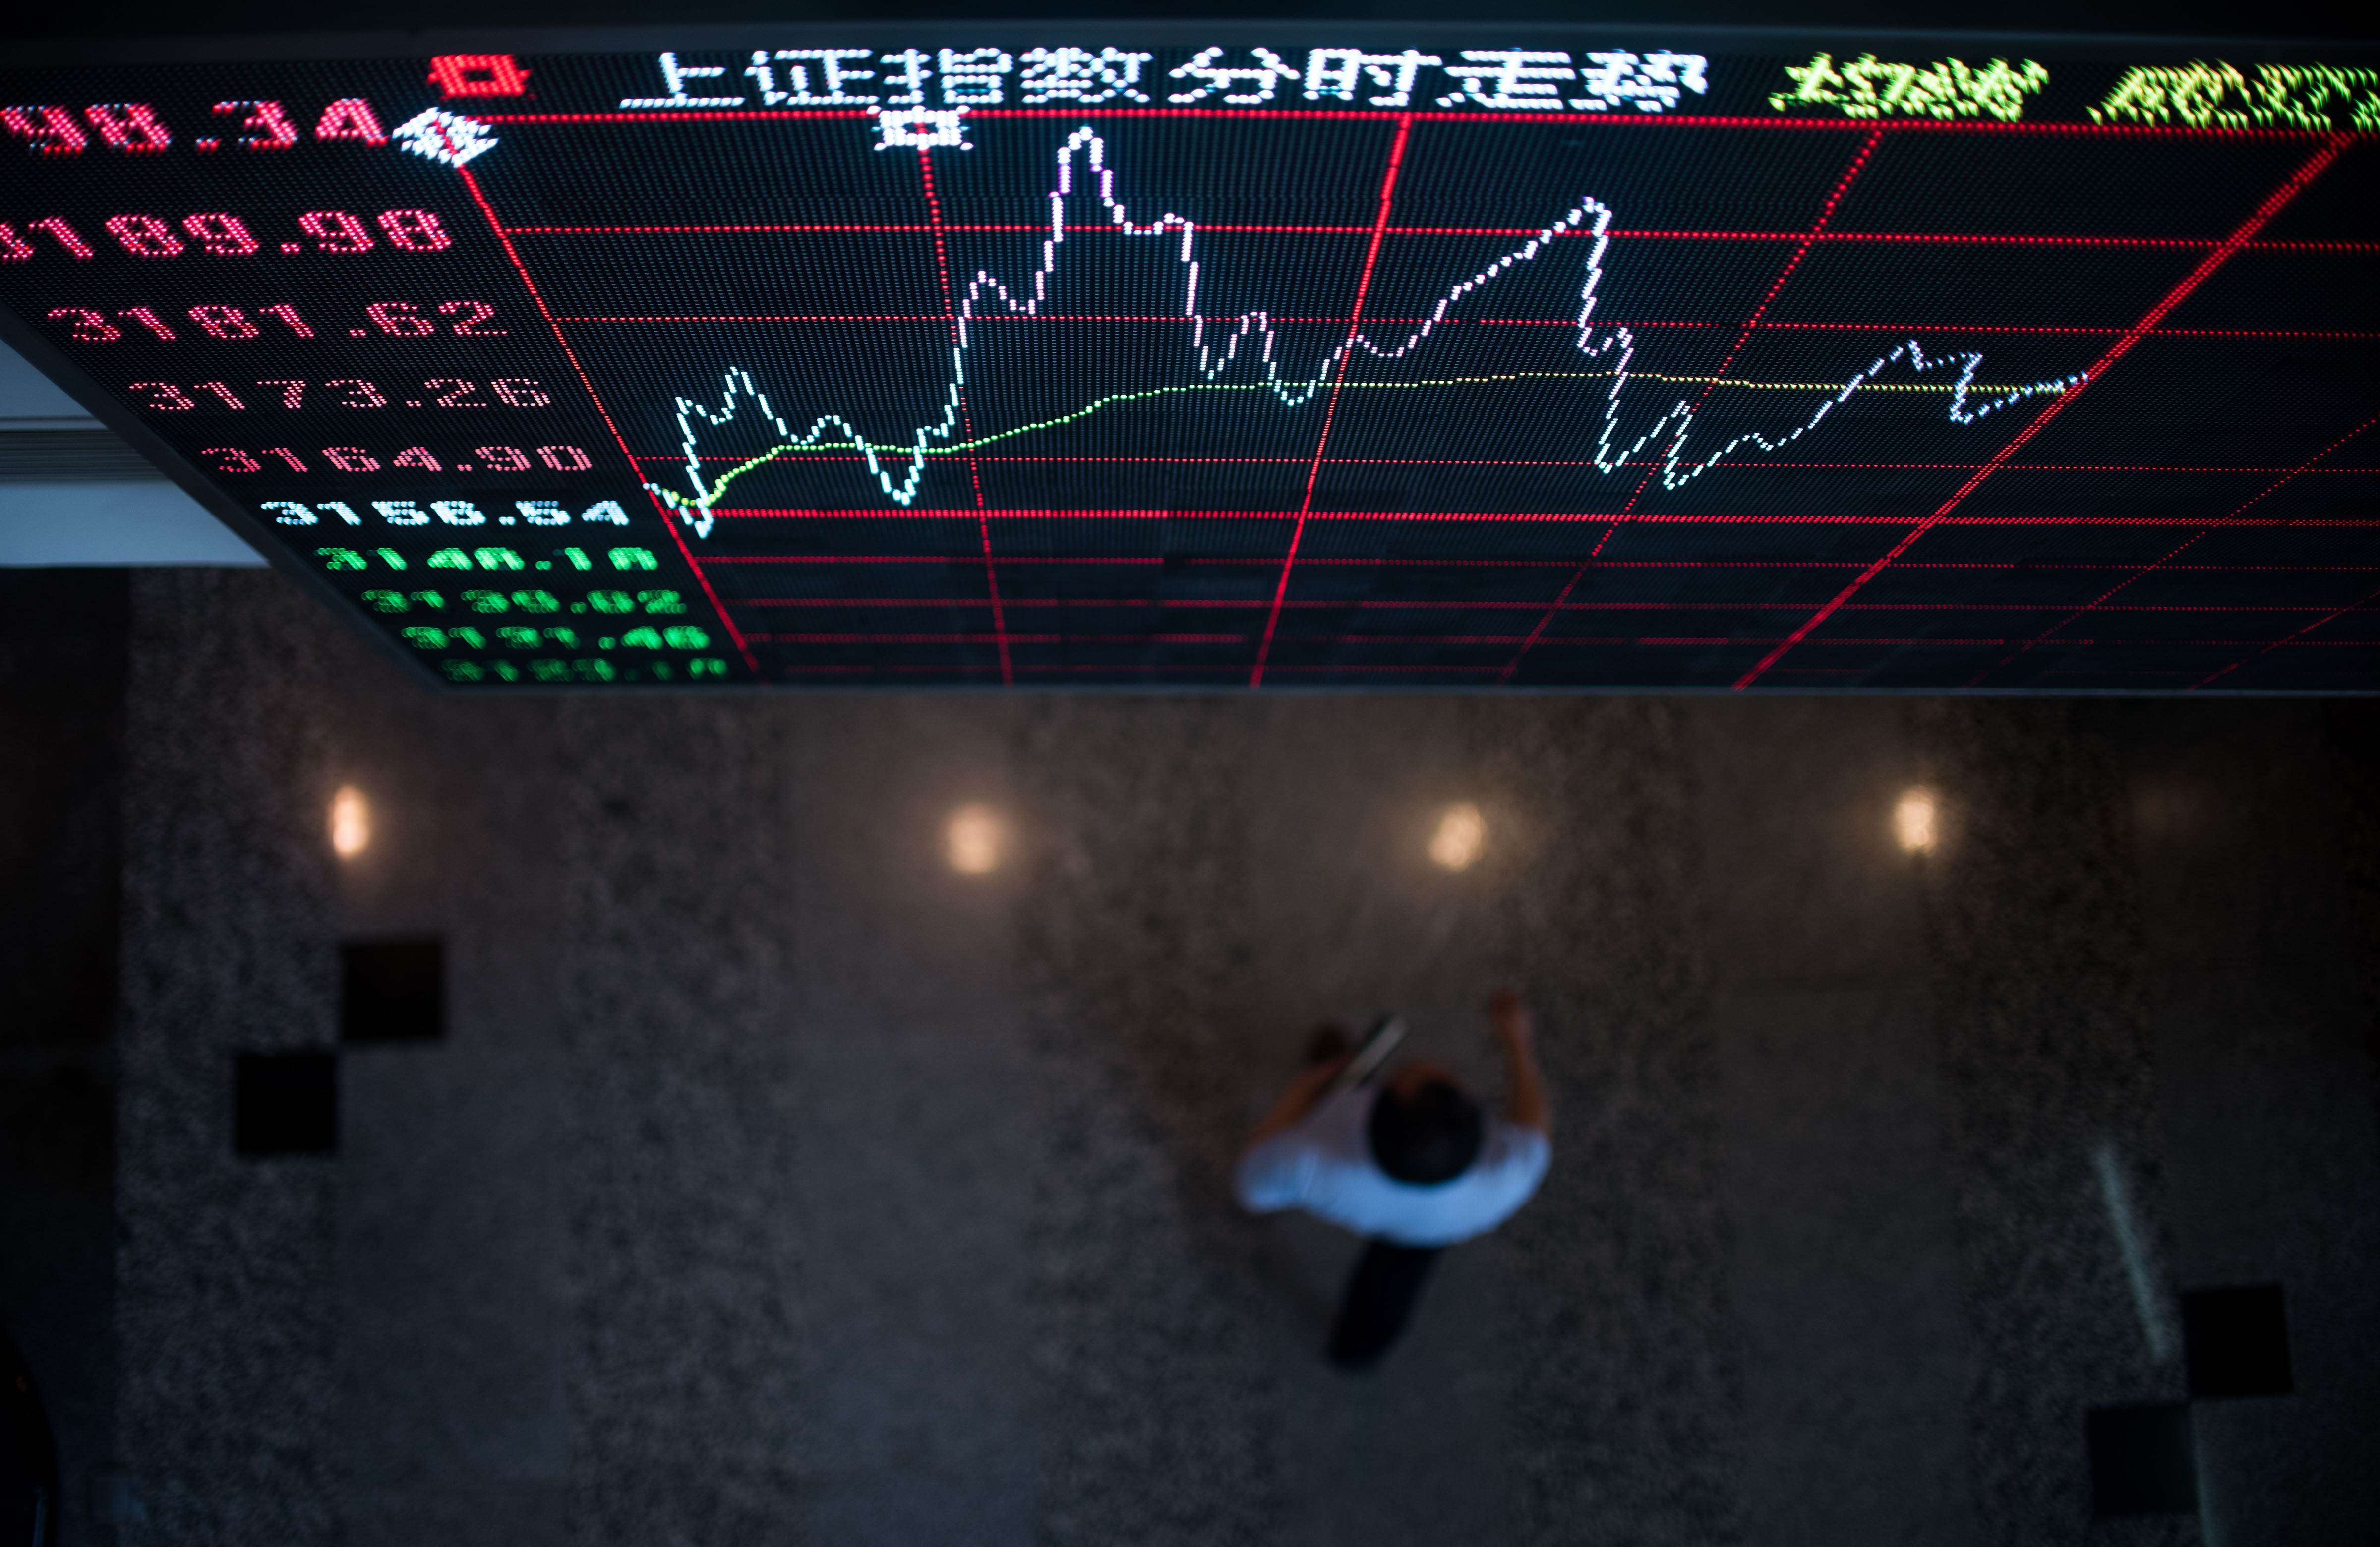 Financial regulators could make use of media analytics, which relies on artificial intelligence to scan vast amounts of data and spot trends. Photo: AFP